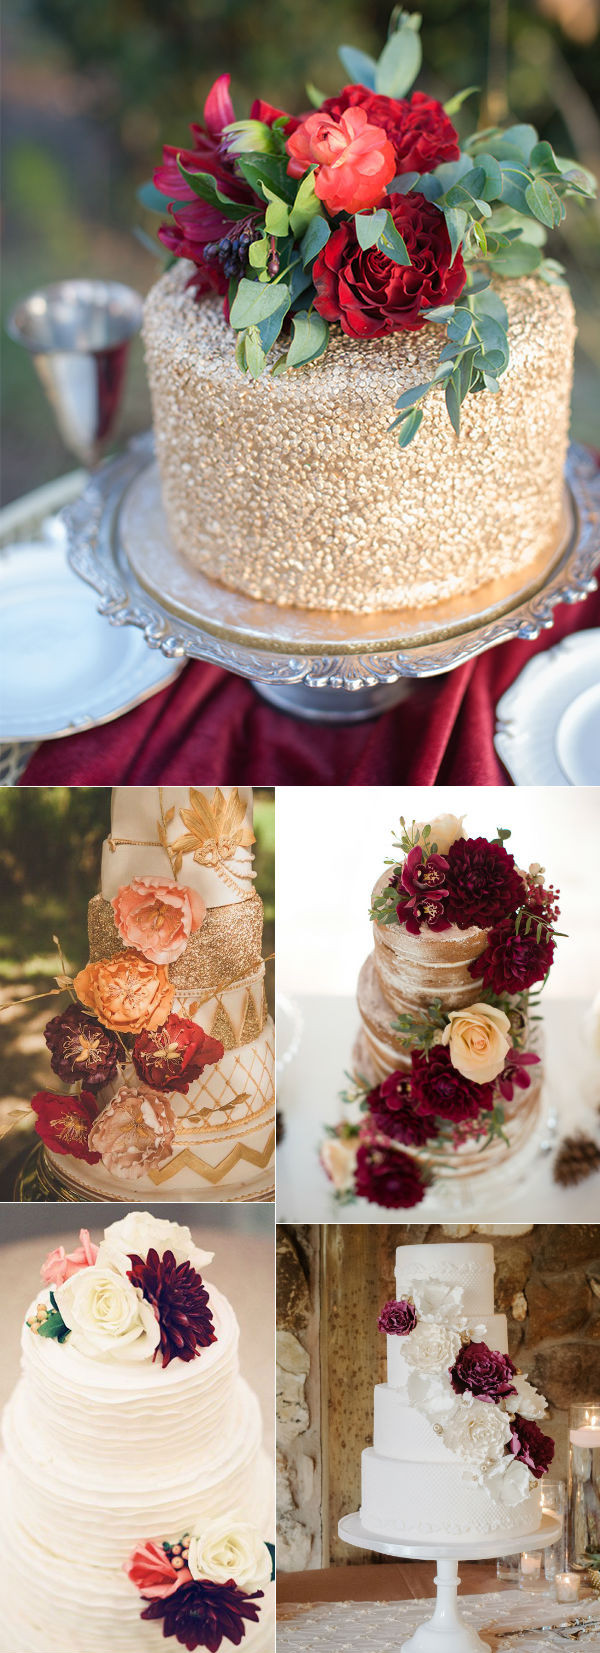 Small Wedding Ideas For Fall
 32 Amazing Wedding Cakes Perfect For Fall